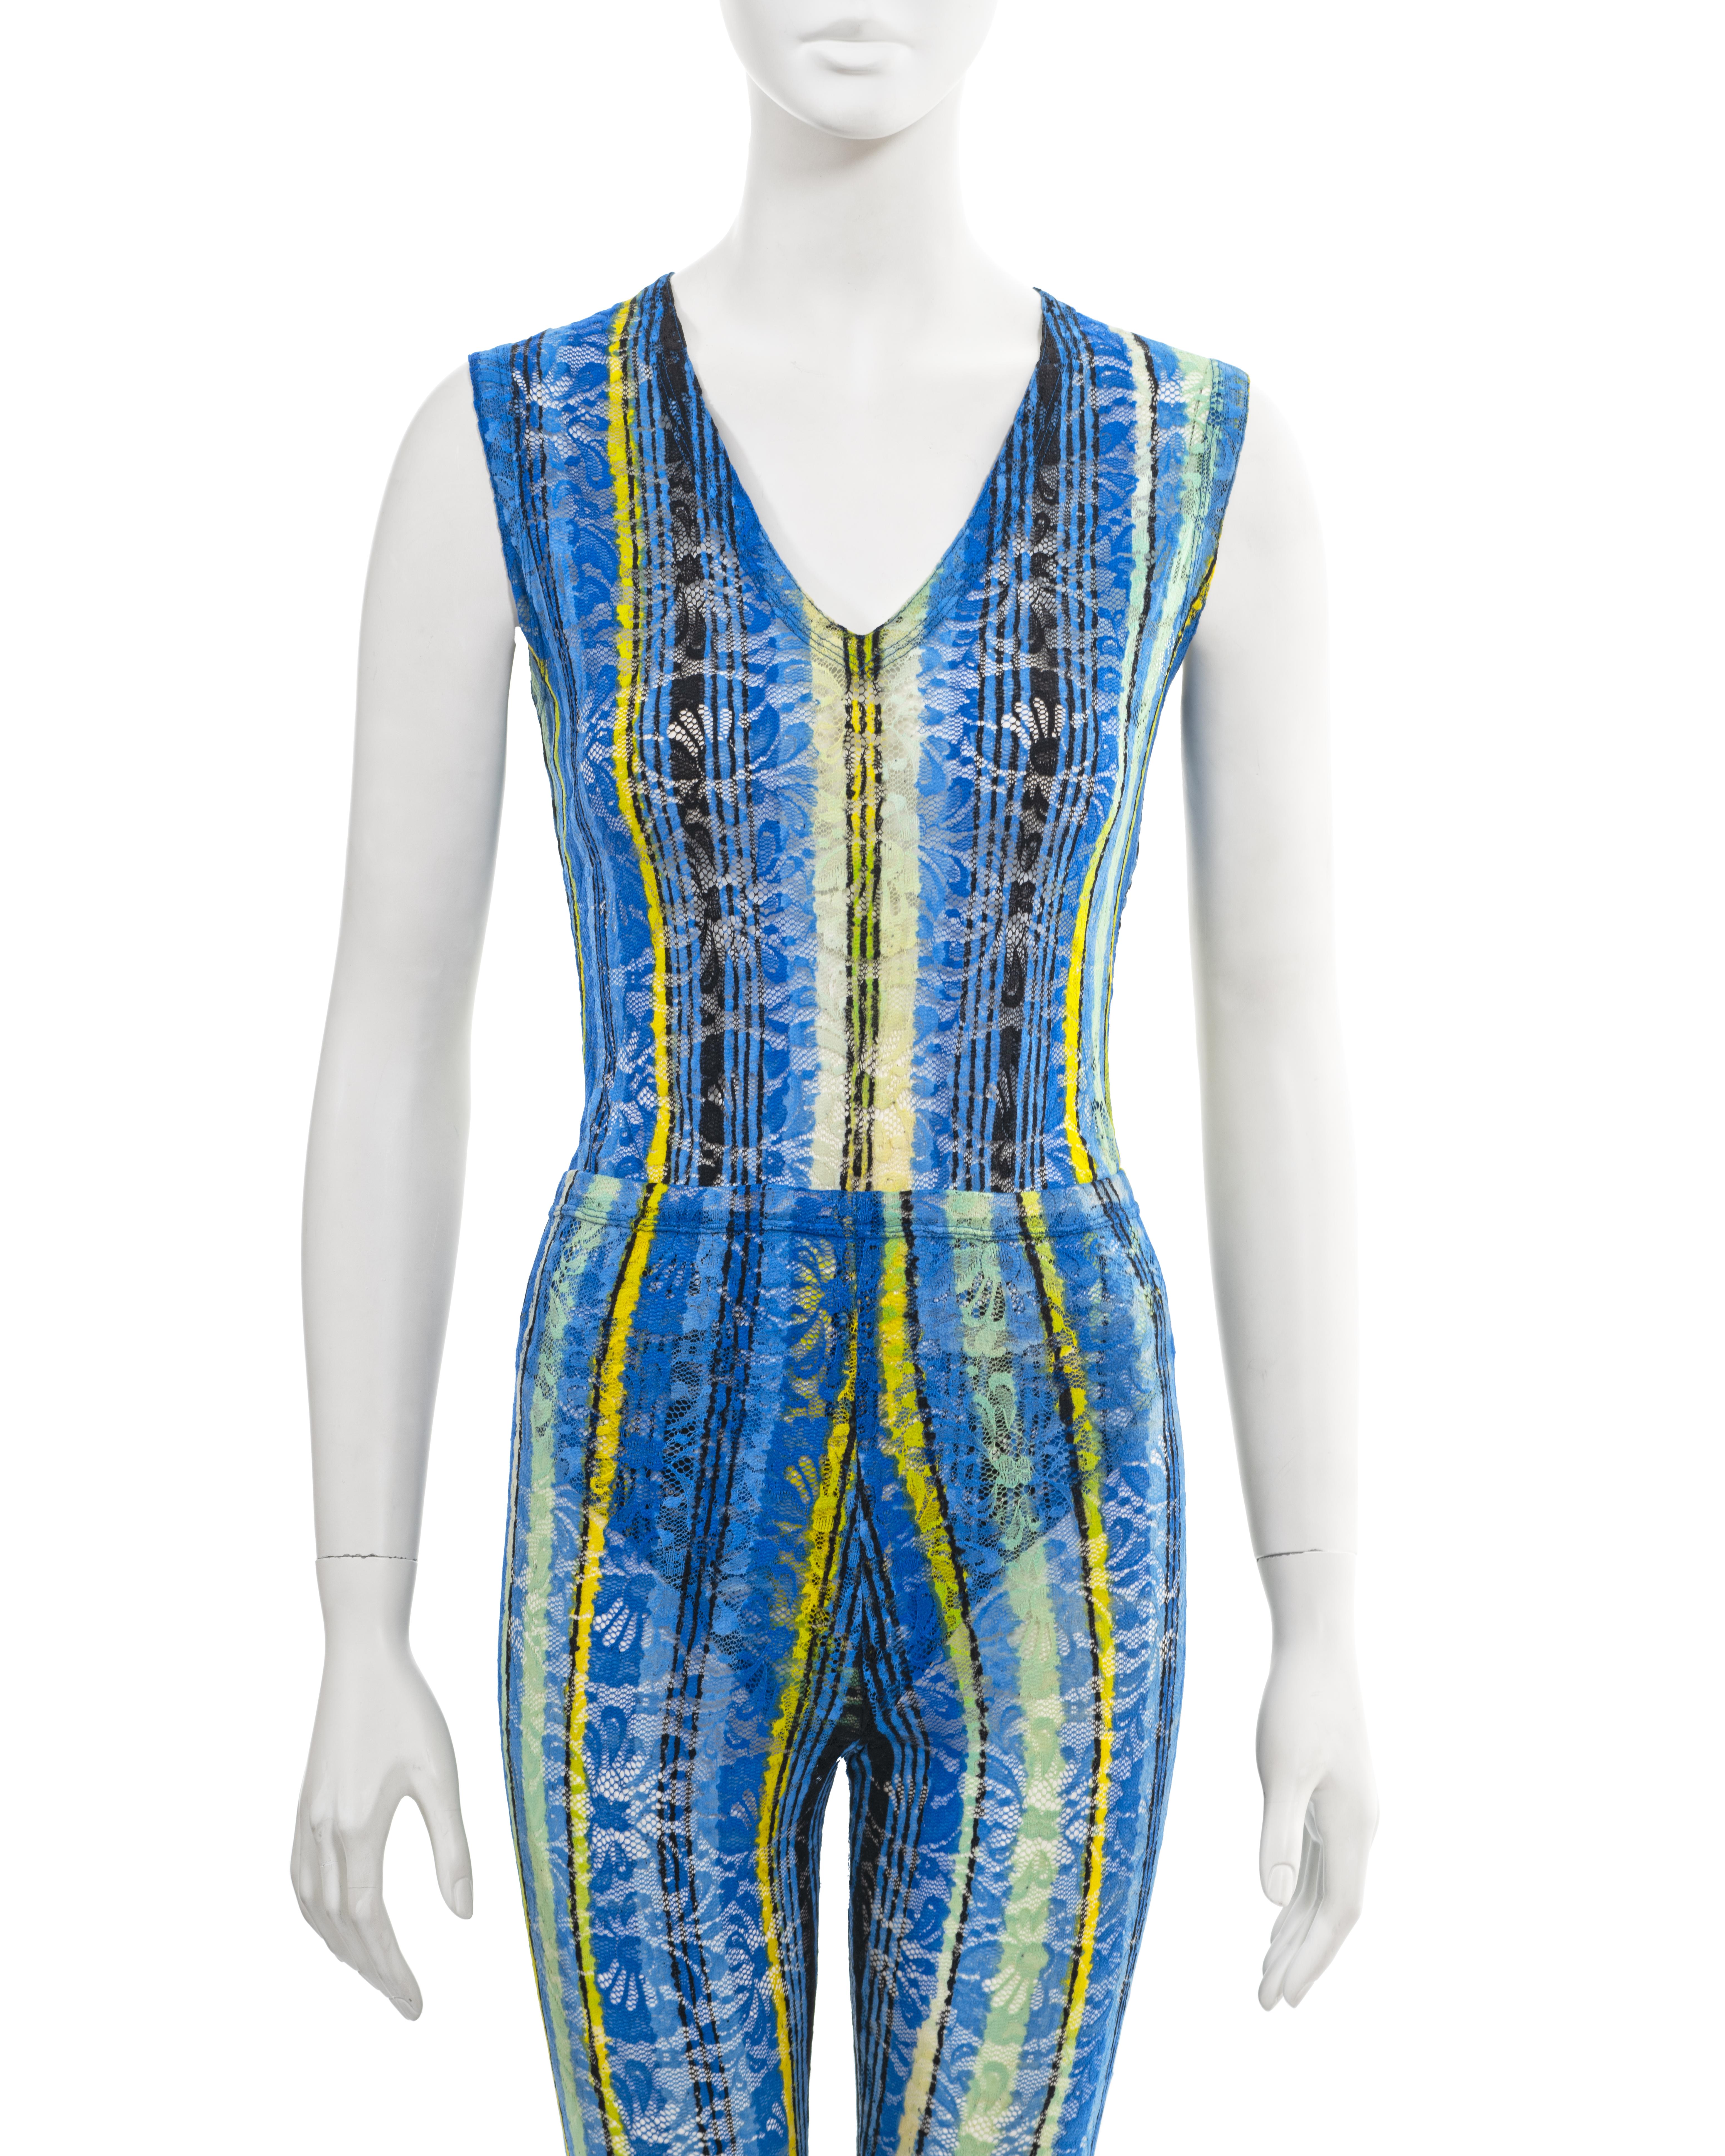 Gianni Versace blue lace bodysuit and leggings set, fw 1993 In Good Condition For Sale In London, GB